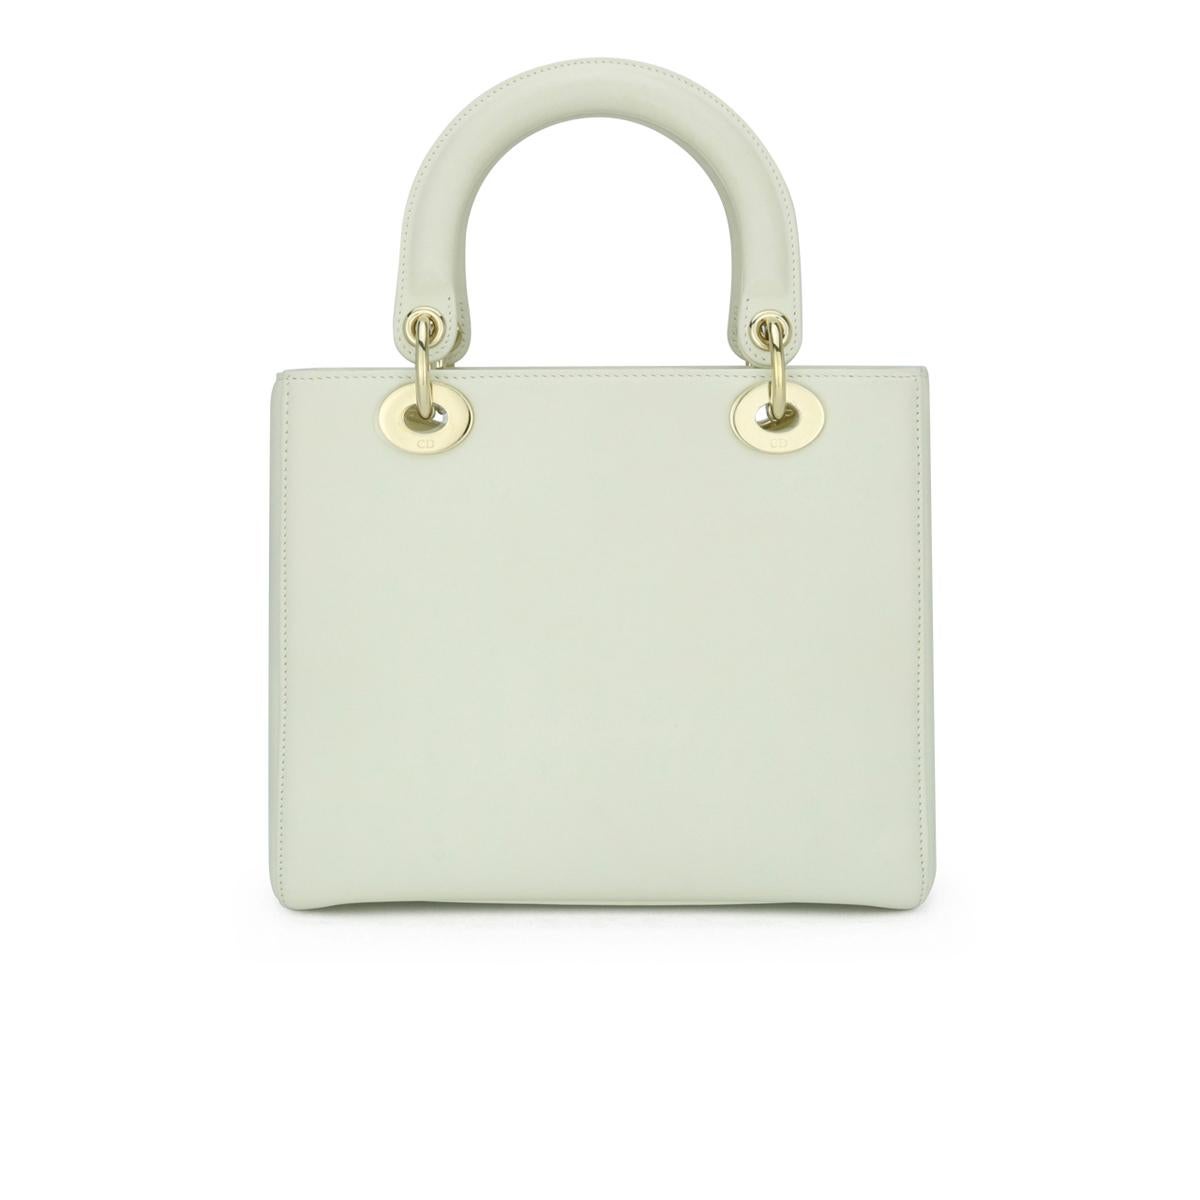 Christian Dior Lady Dior Medium Bag in Amour Print Off White Calfskin with Gold Hardware 2018.

This bag is in very good condition. 

This stunning bag is designed in collaboration with artist Niki de Saint Phalle for Christian Dior’s Dior Amour